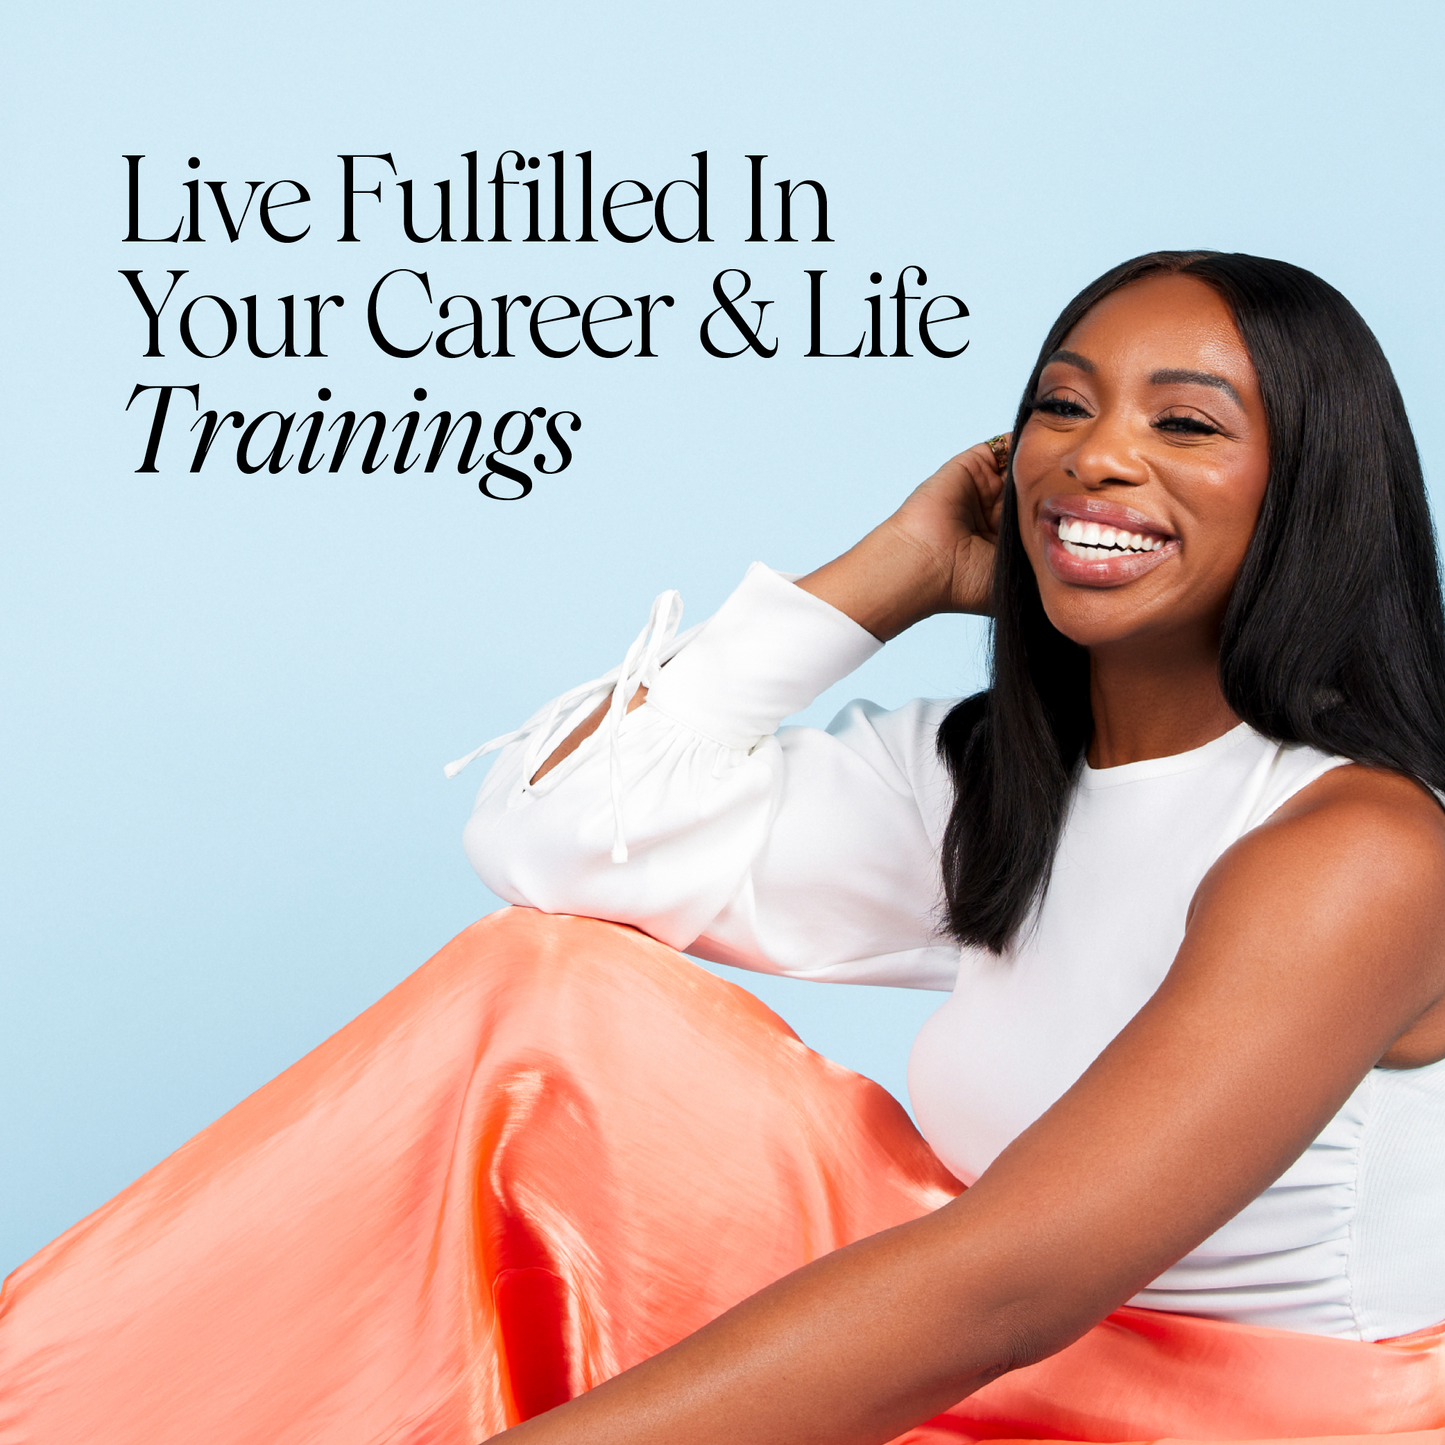 Live Fulfilled In Your Career & Life Trainings